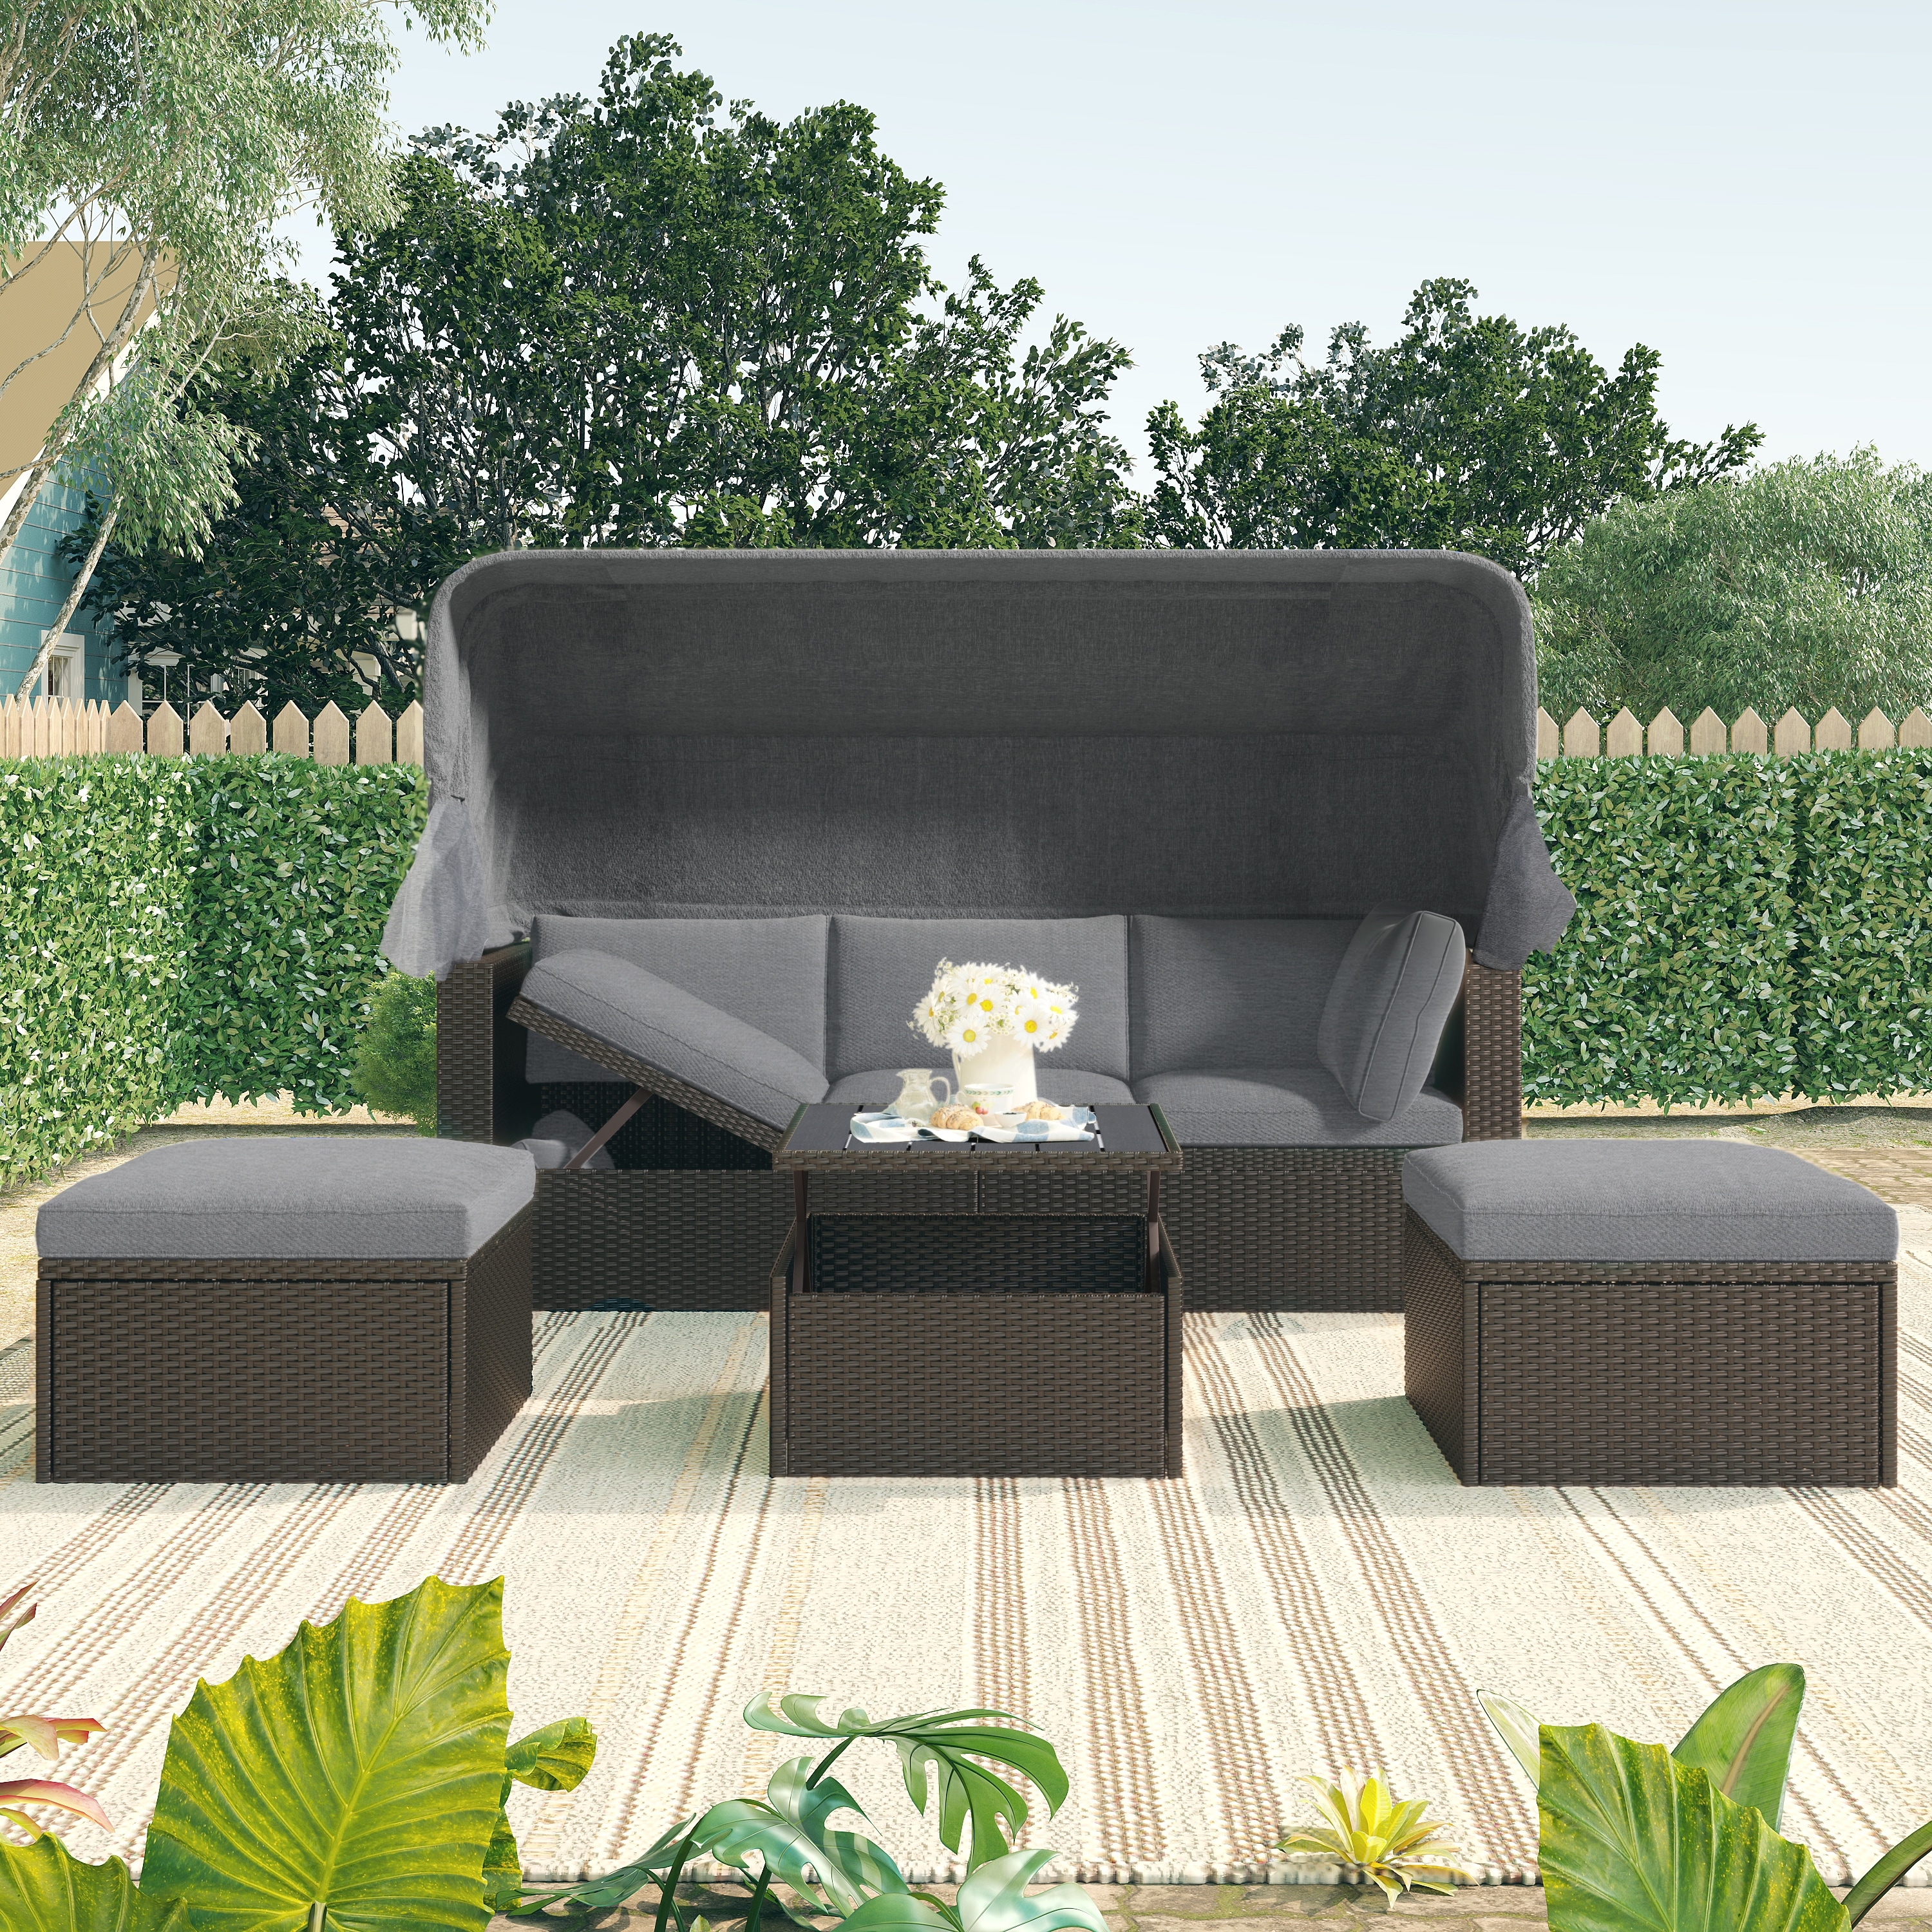 Outdoor Patio Daybed With Retractable Canopy  Washable Cushions  Ideal For Backyard Or Porch Seating